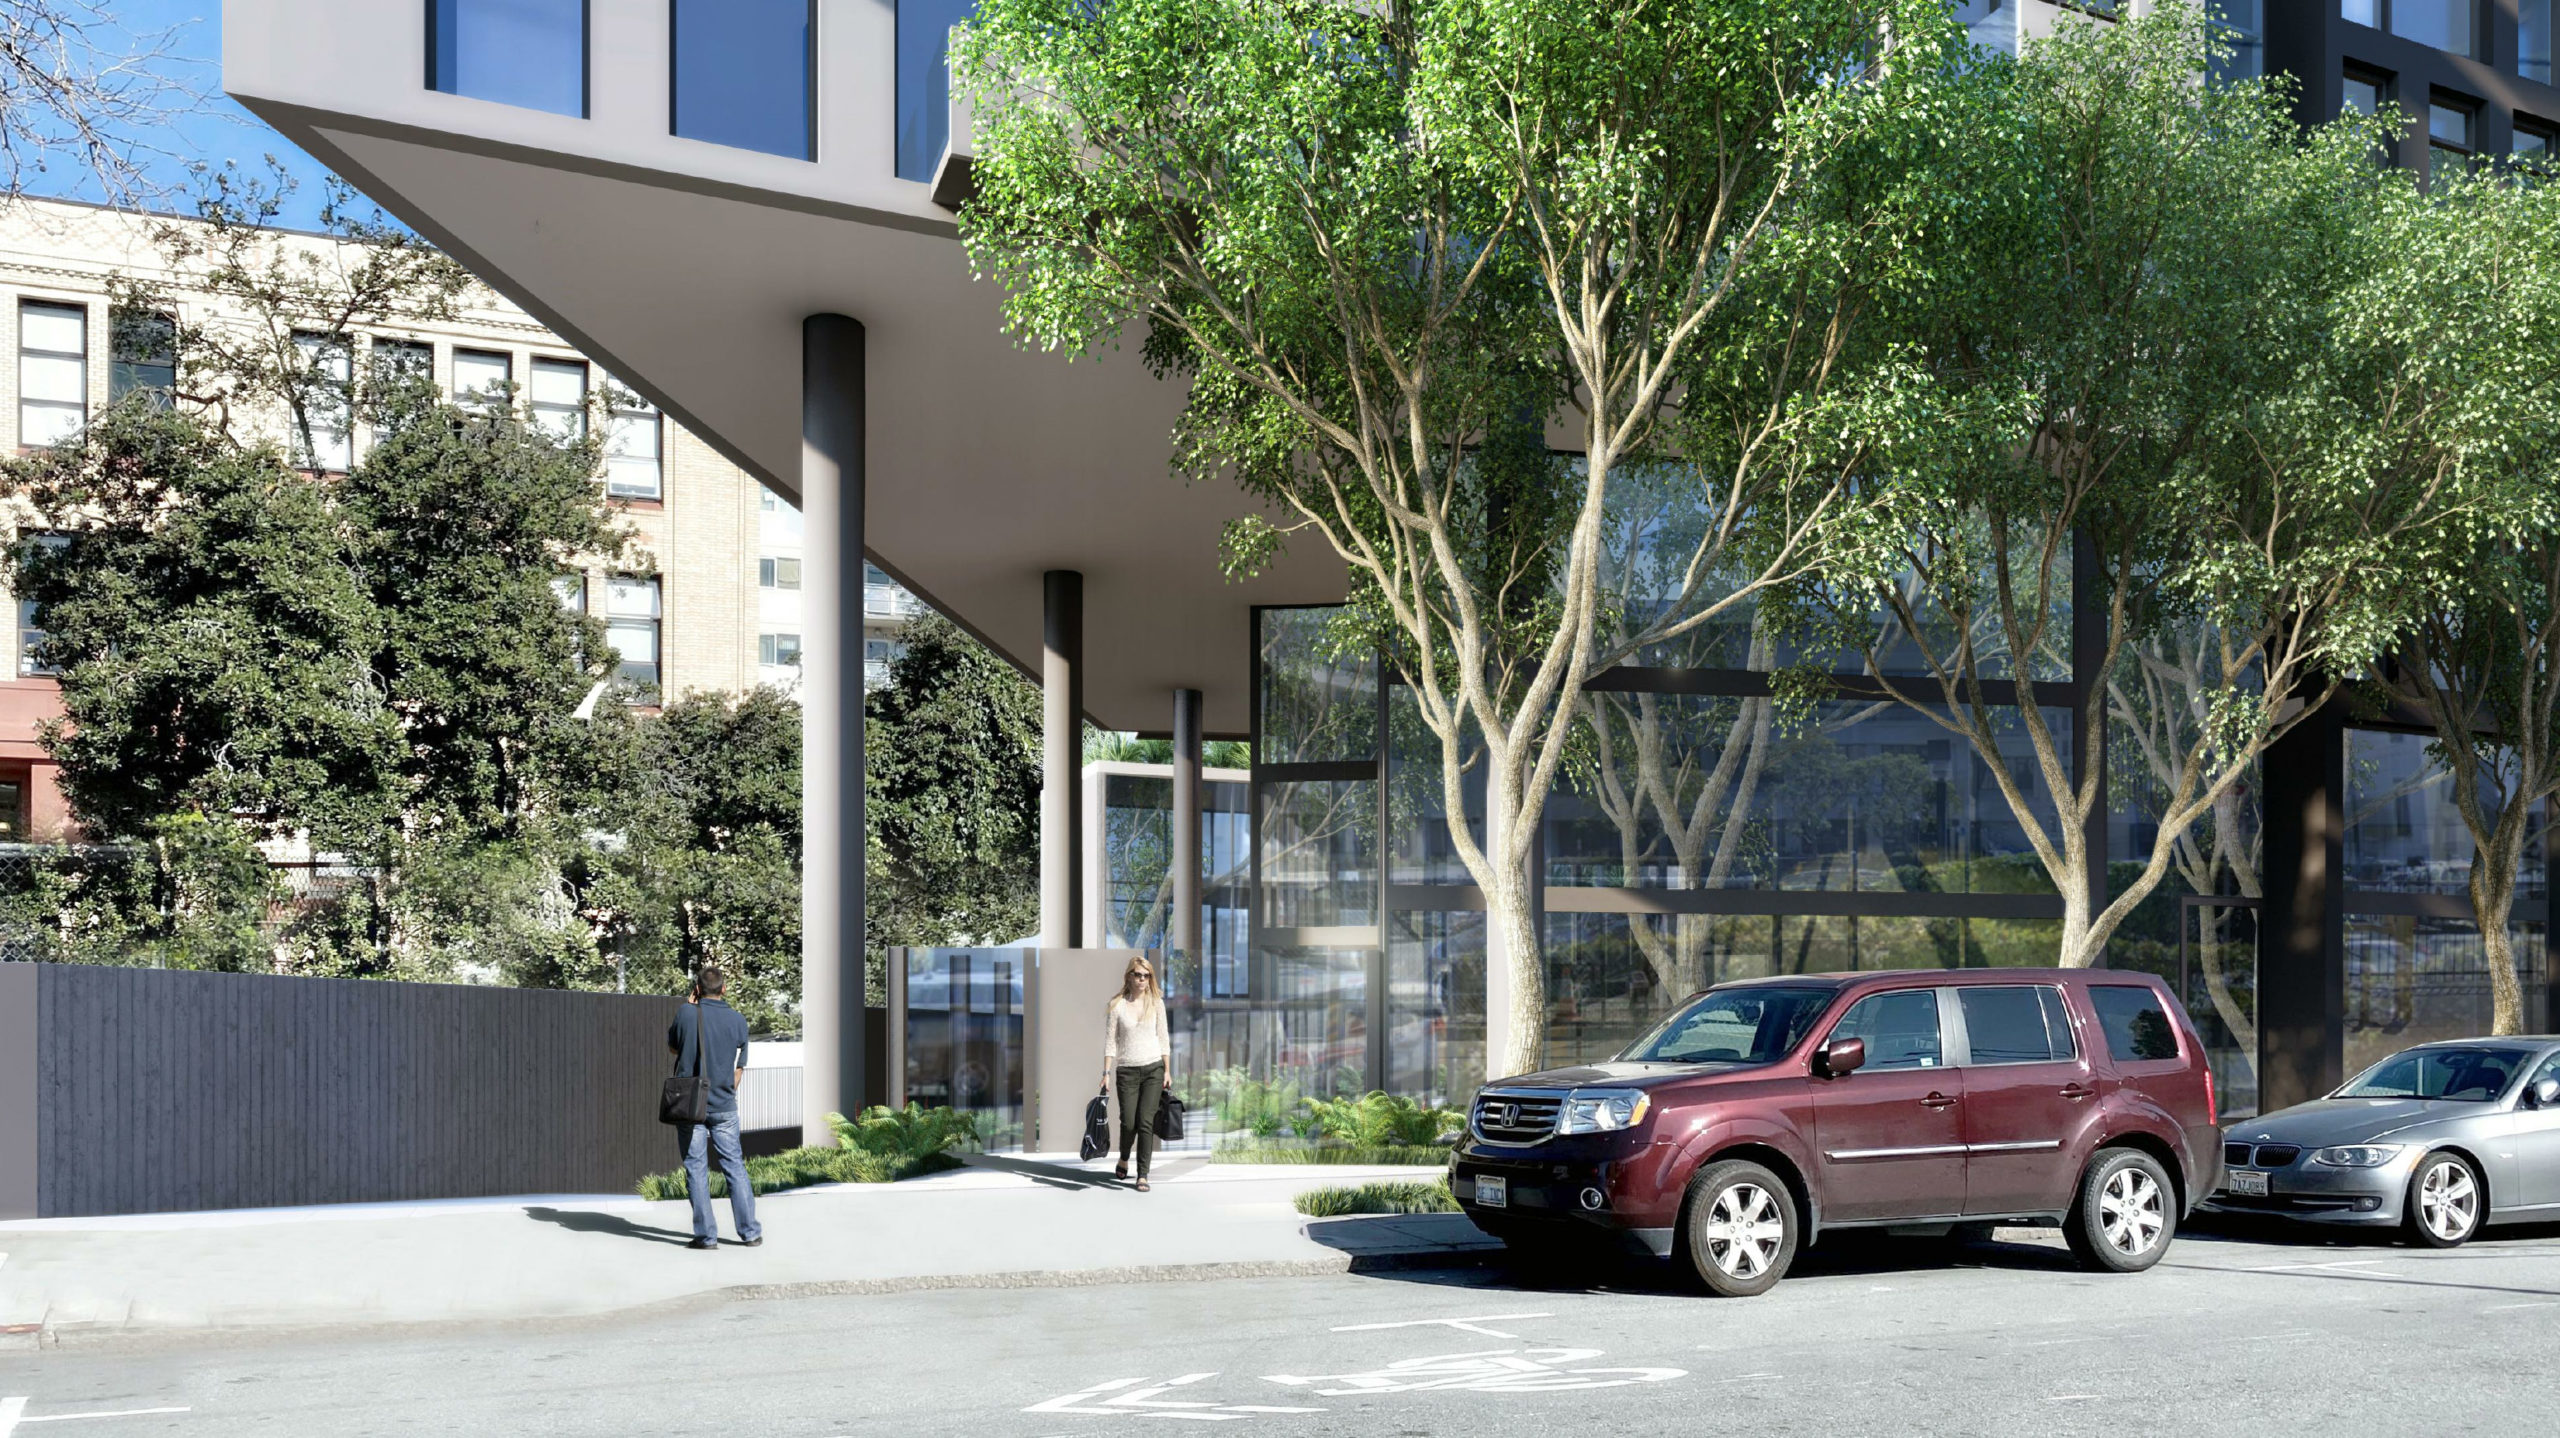 600 McAllister Street residential entry, rendering by David Baker Architects